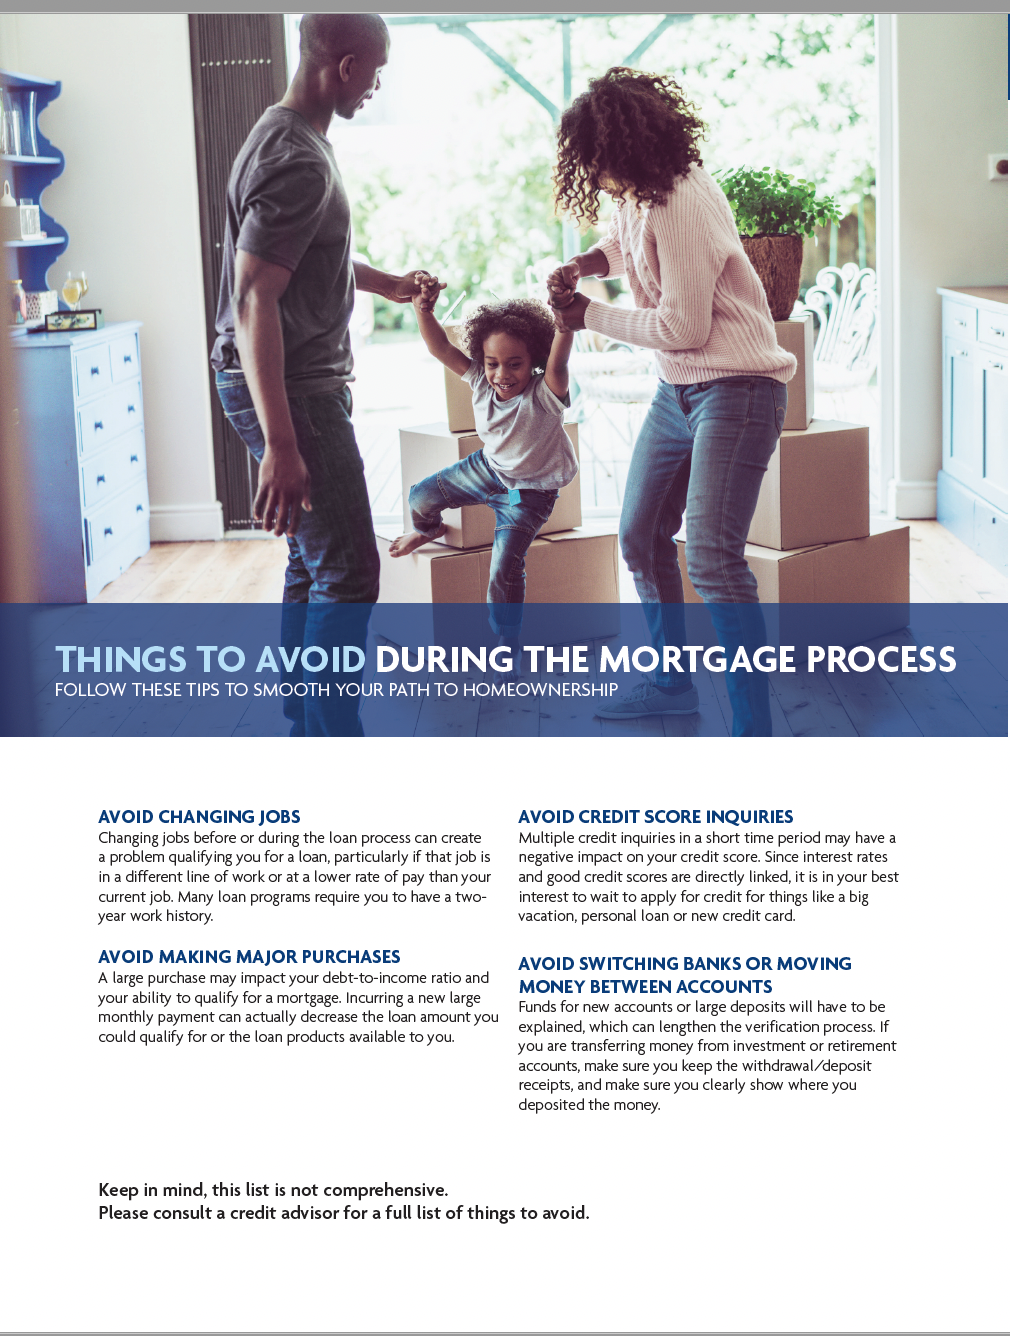 WM Things to avoid during mortgage process.png